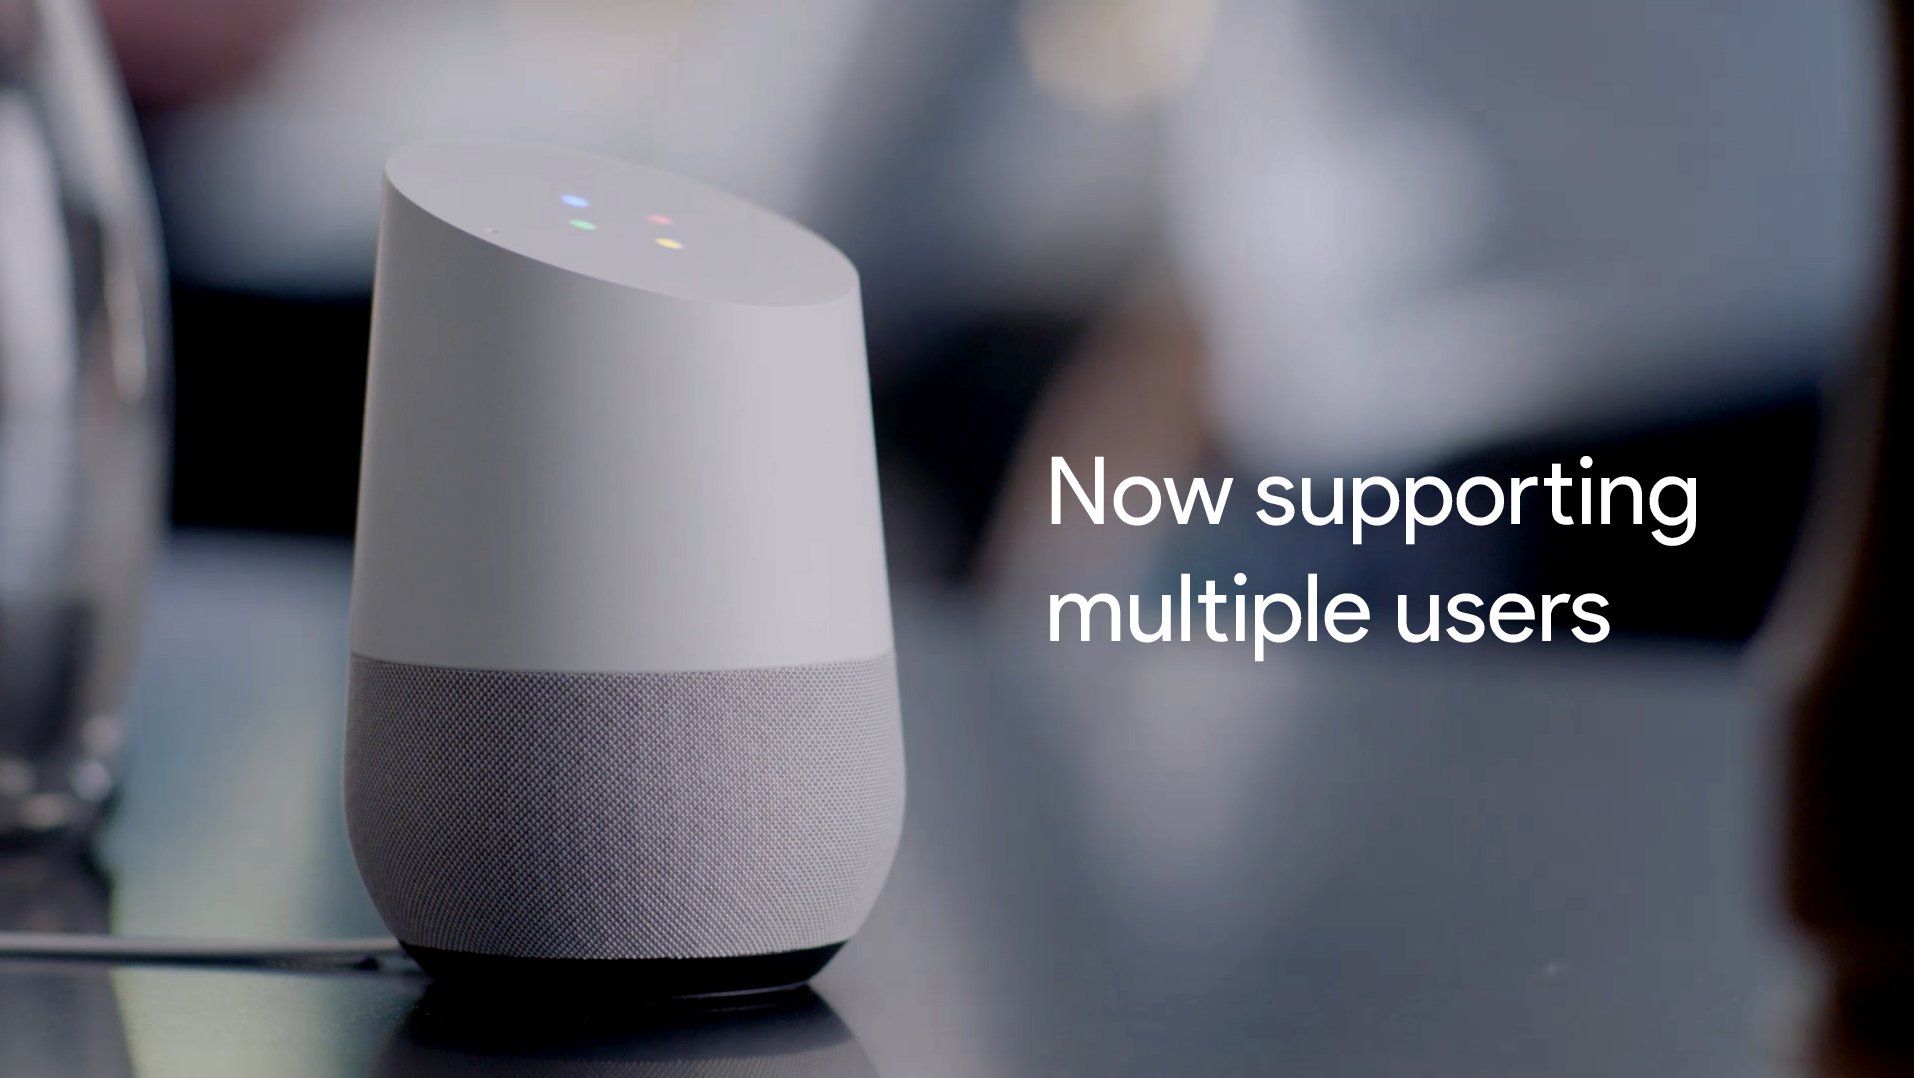 Google Home now supports multiple users